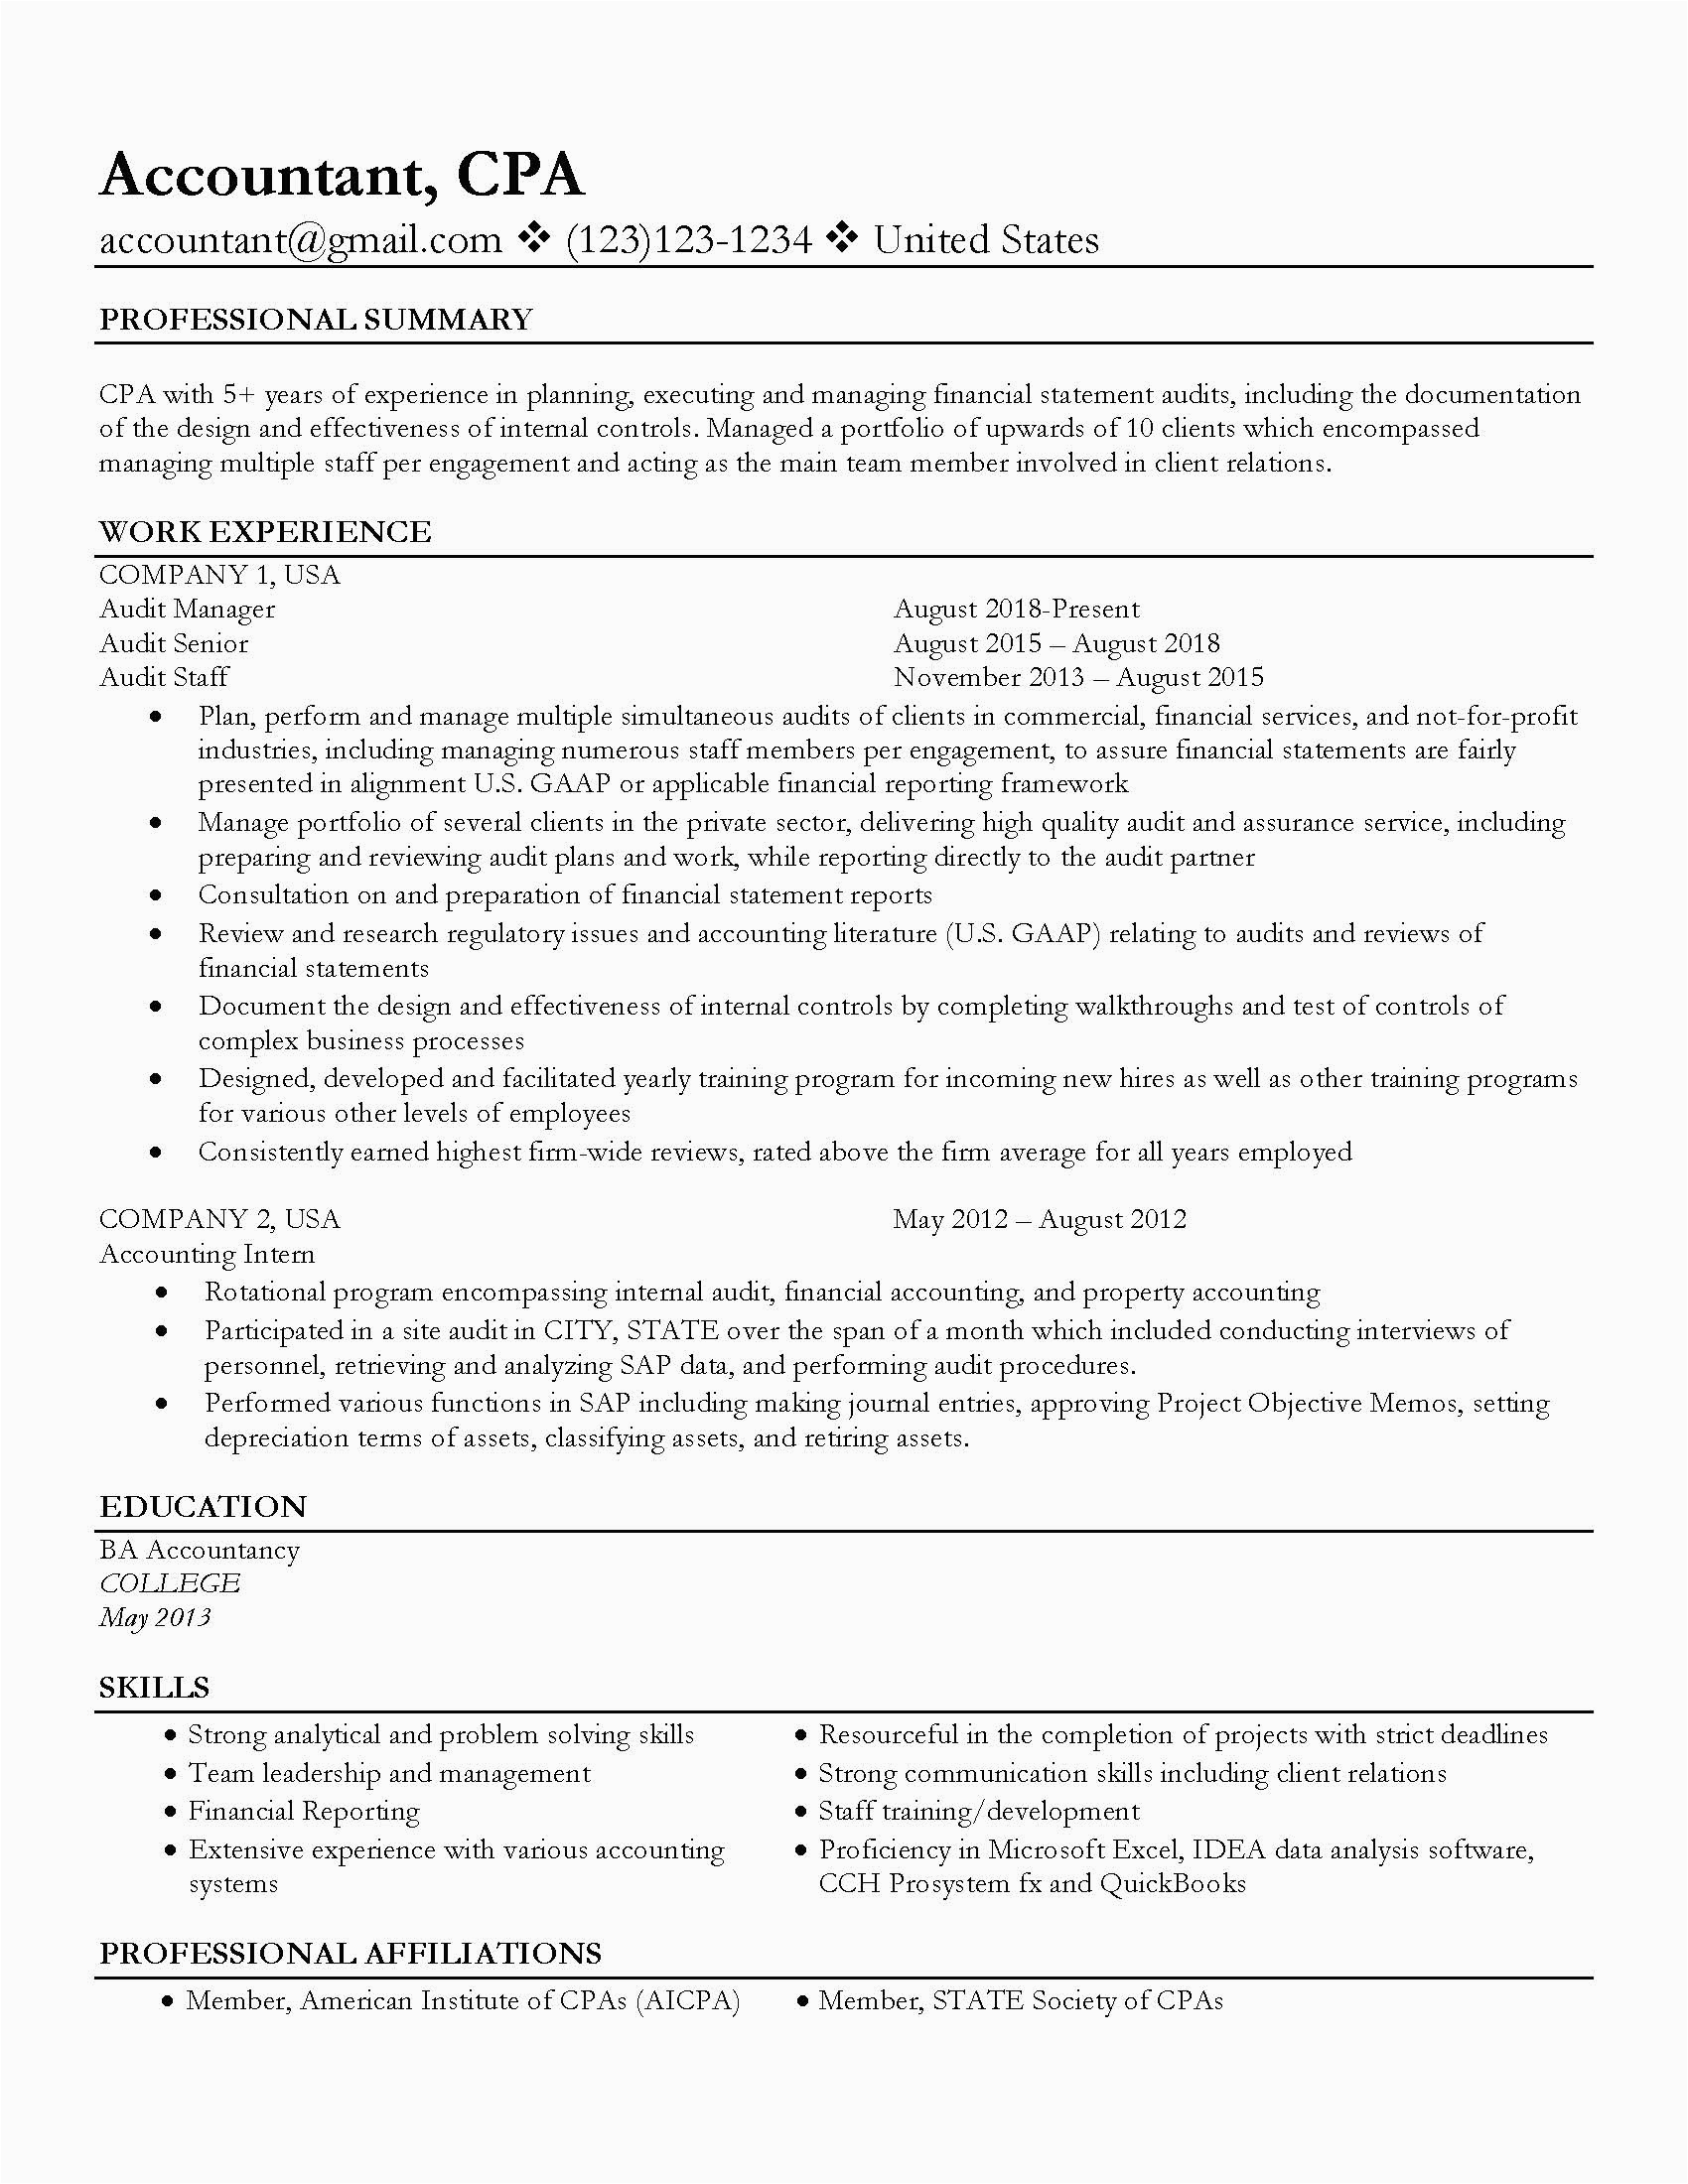 Big 4 Public Accounting Resume Sample How Much Does A Cpa Make Reddit Whtoda